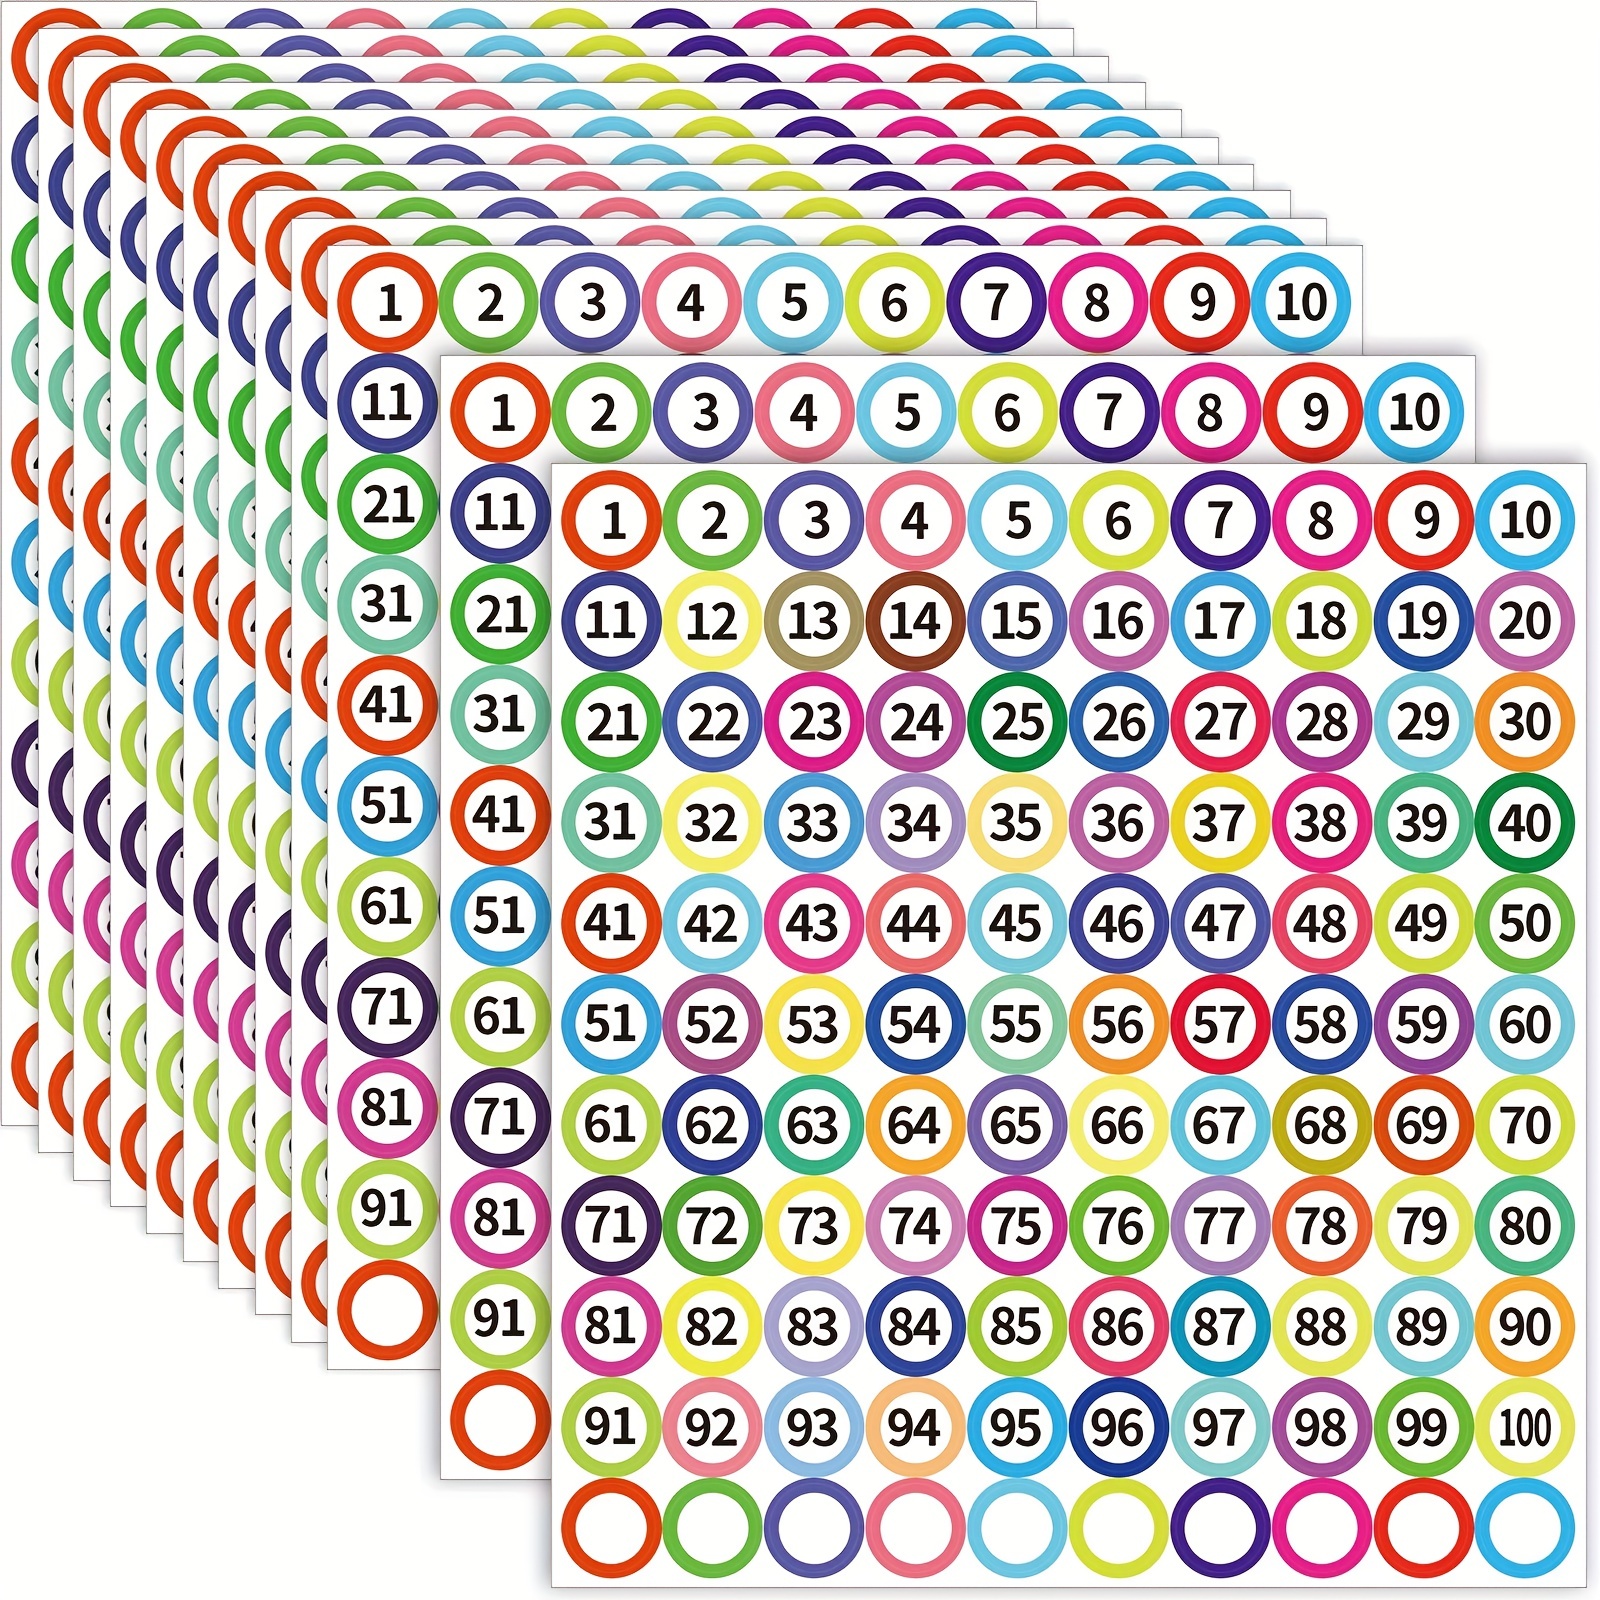 Number Stickers - 1 to 100 Self Adhesive 0.4 Small Round Number 1